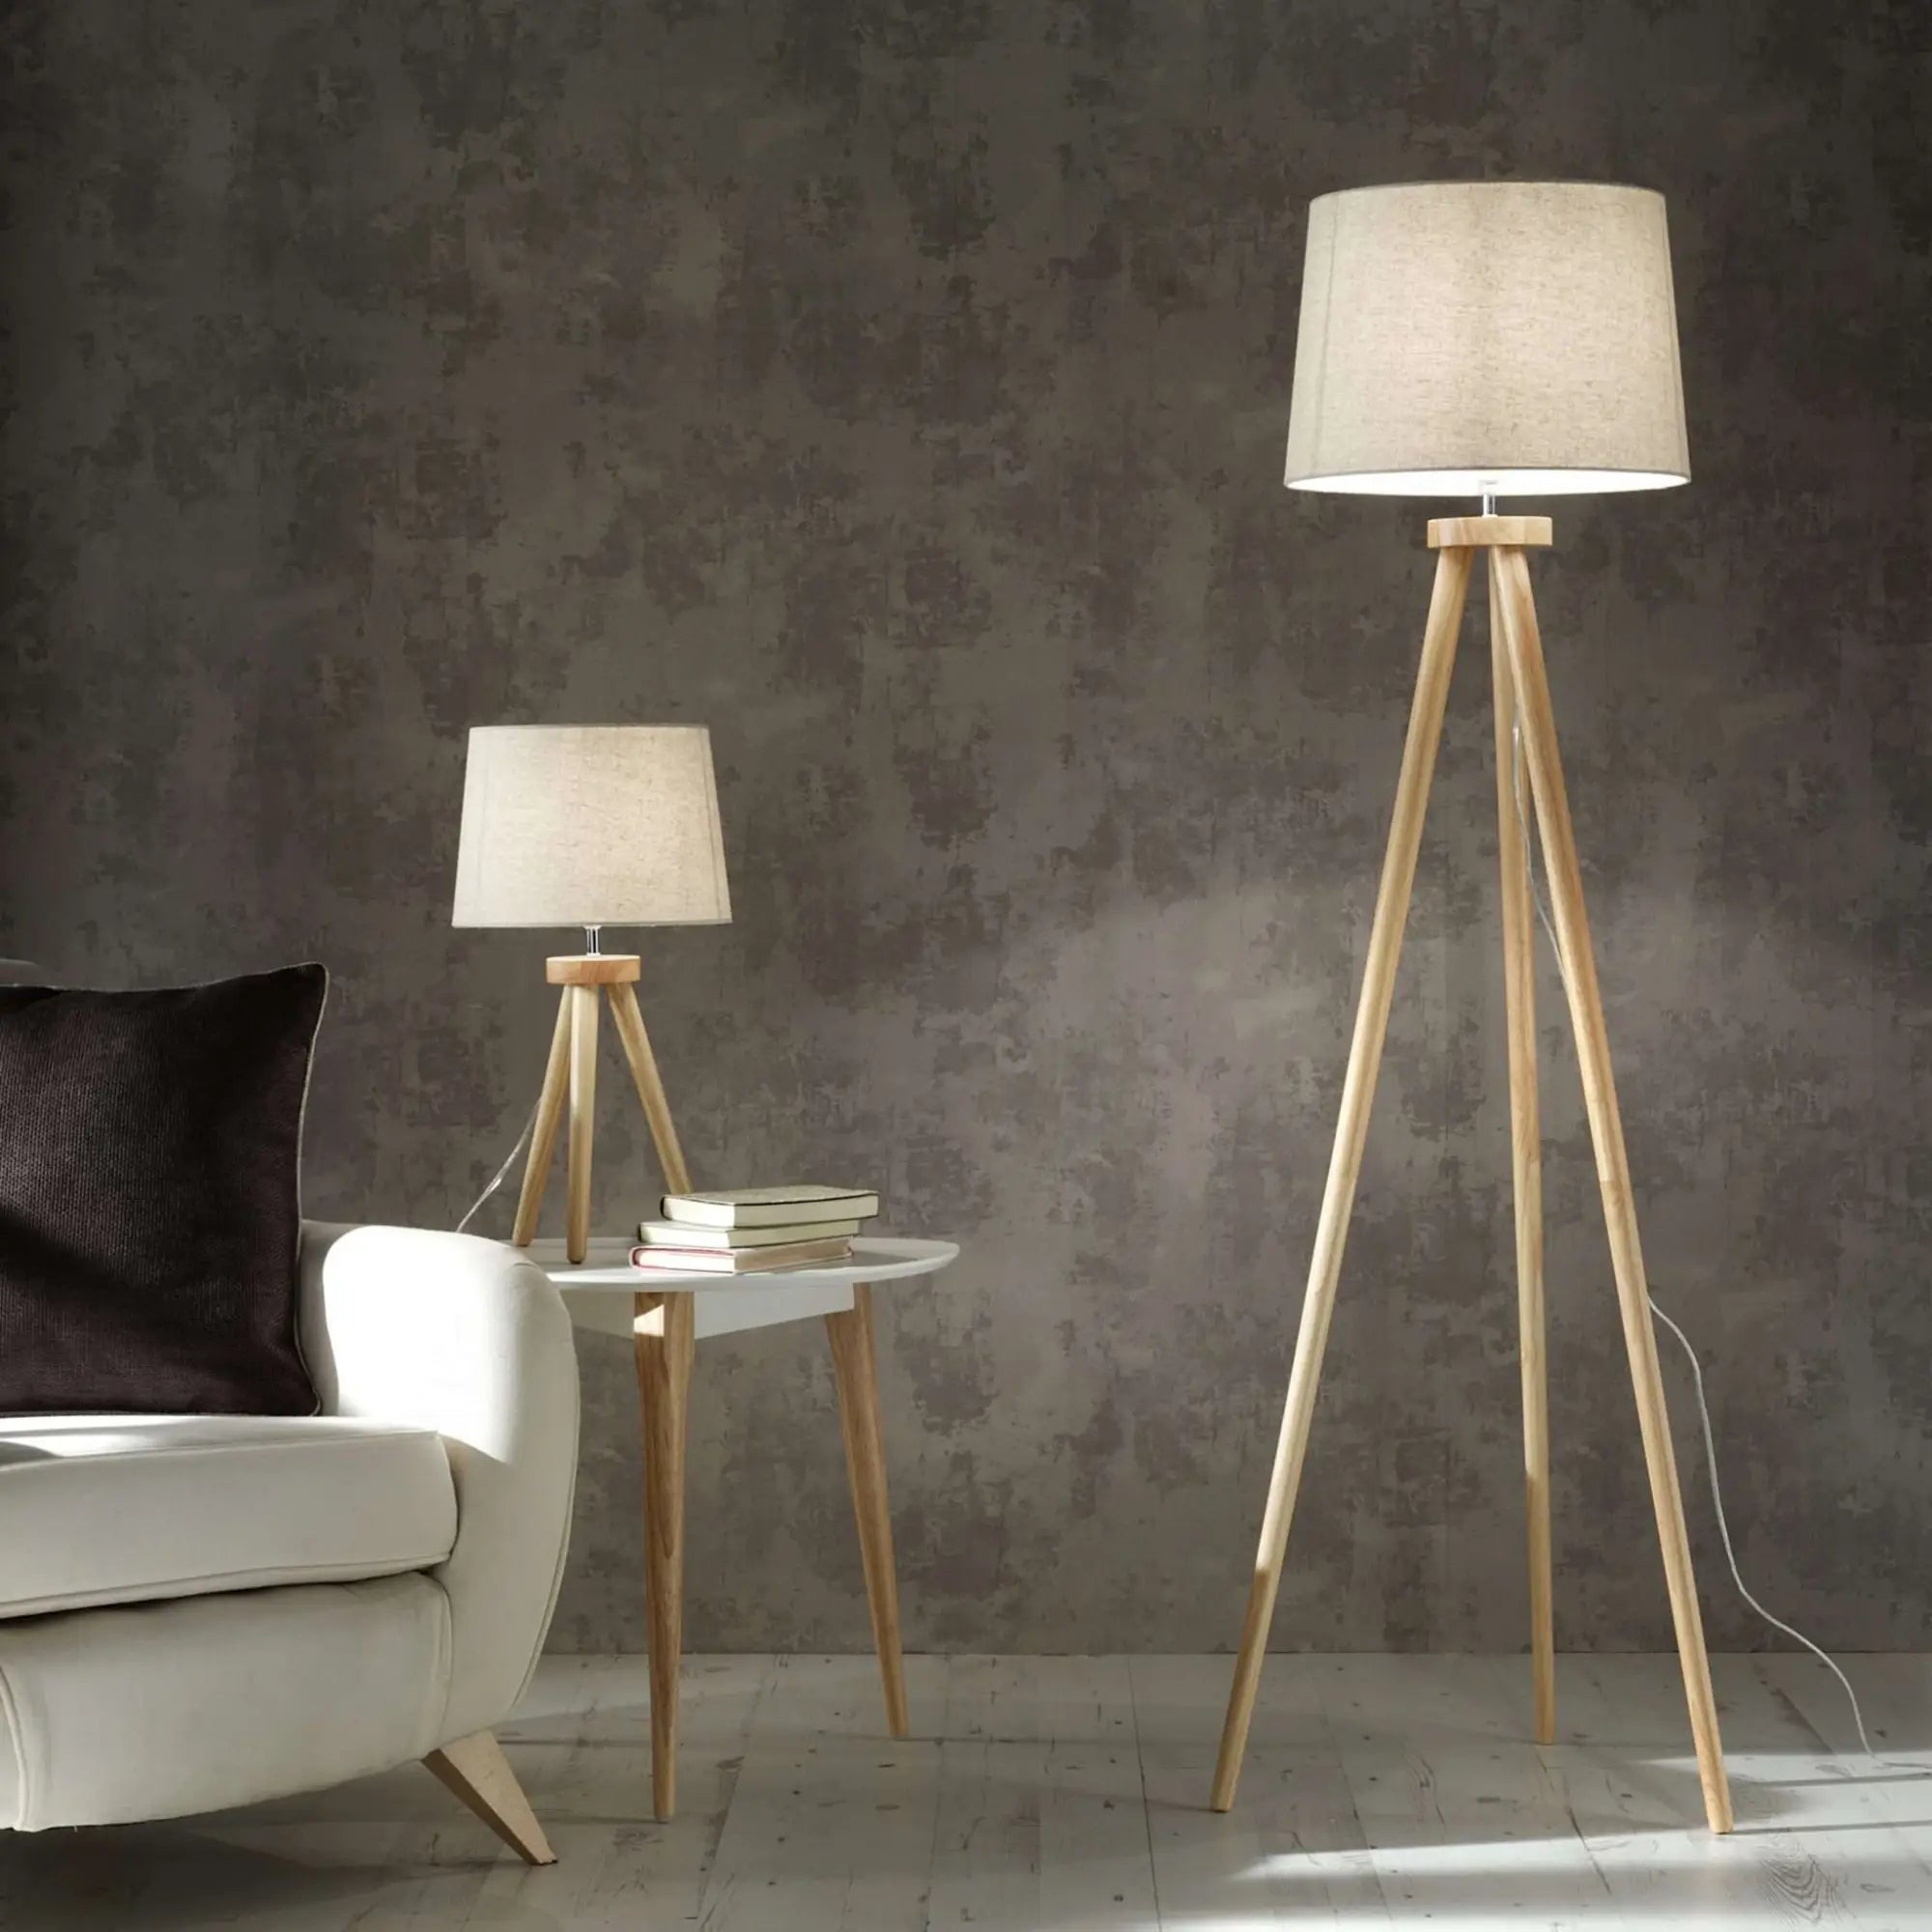 Explore Our Collection Of Tripod Floor Lamps - Balance And Style